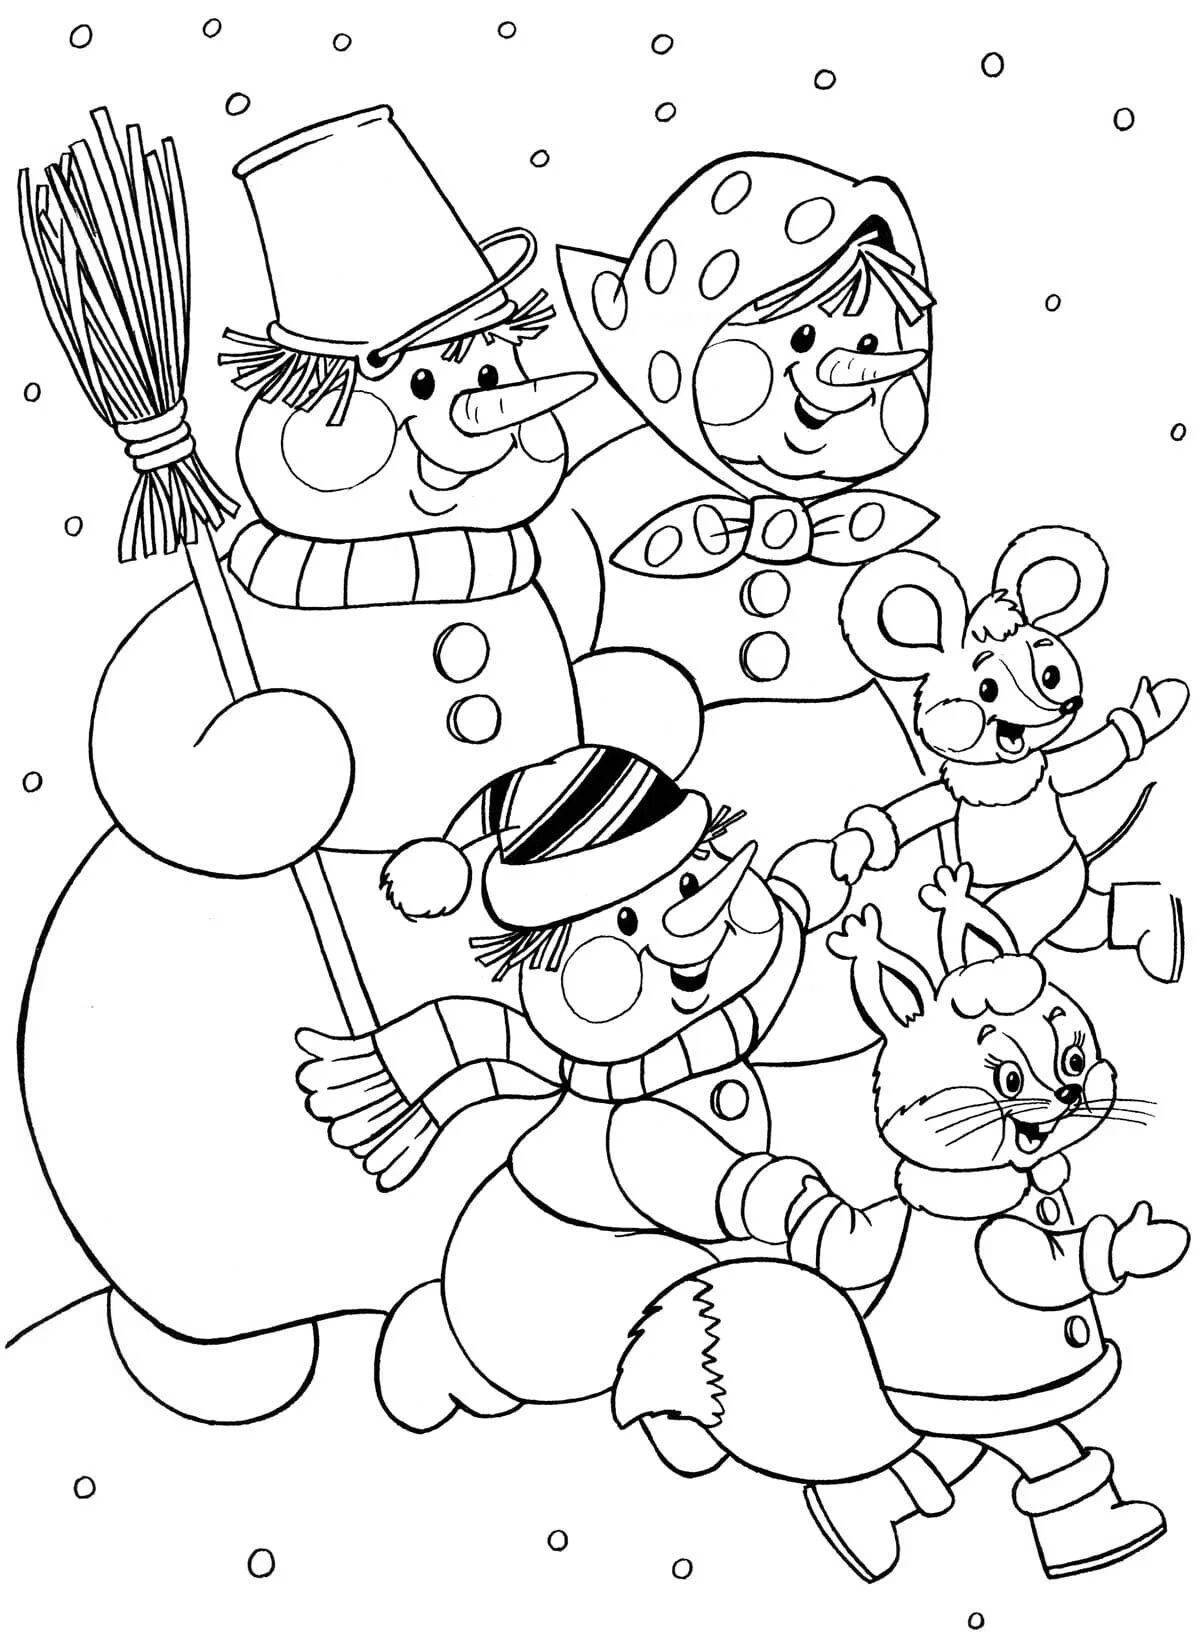 Refreshing snowman coloring book for 5 year olds